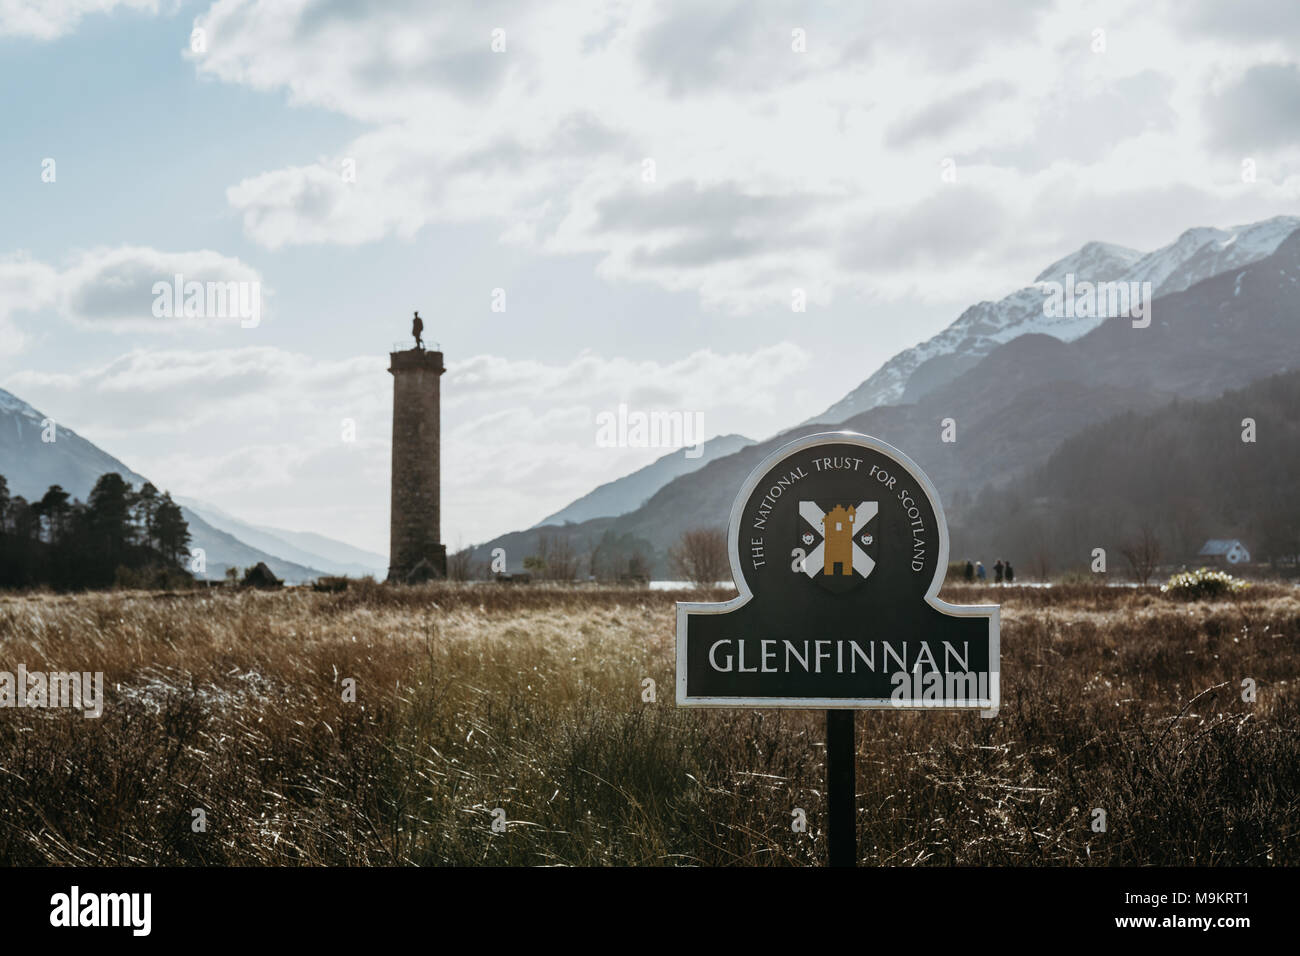 Close up of Glenfinnan sign, Glenfinnan Monument on the background. The monument is cared for by the National Trust for Scotland. Stock Photo